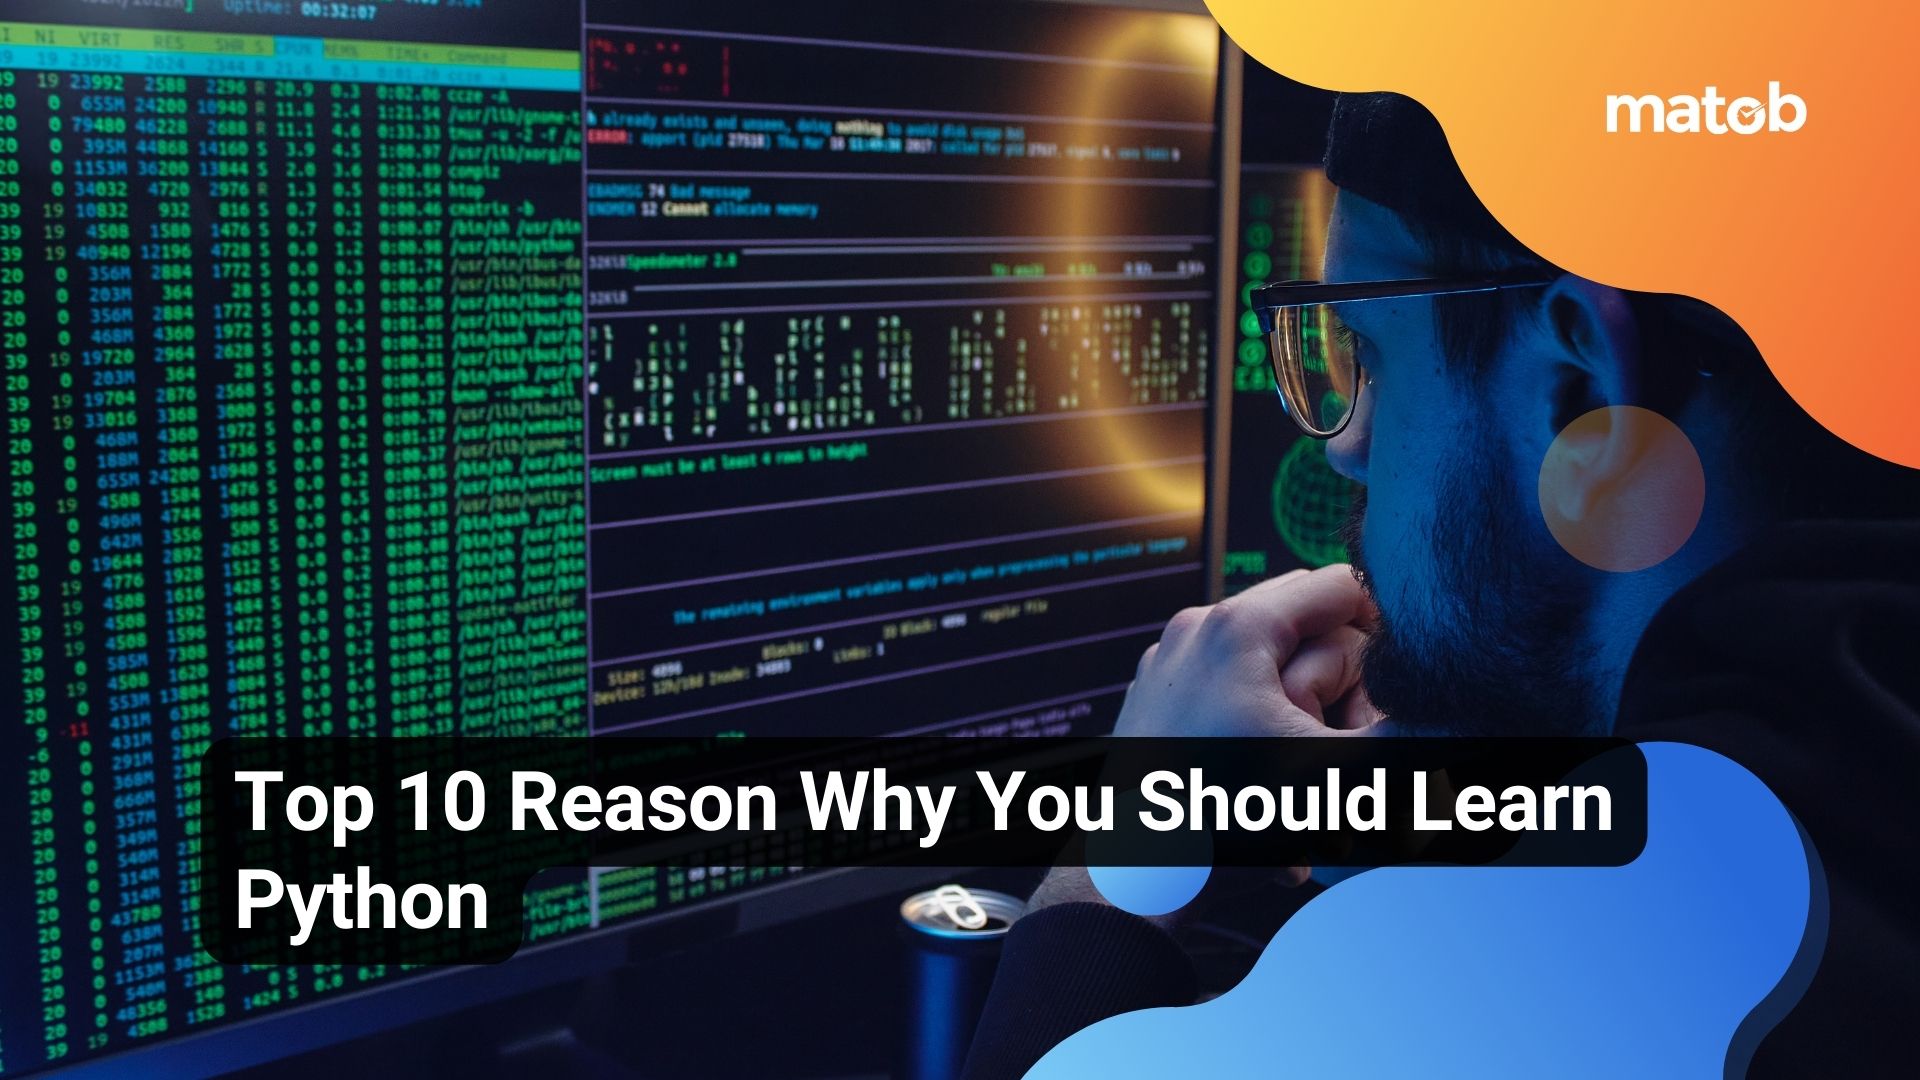 Top 10 Reason Why You Should Learn Python